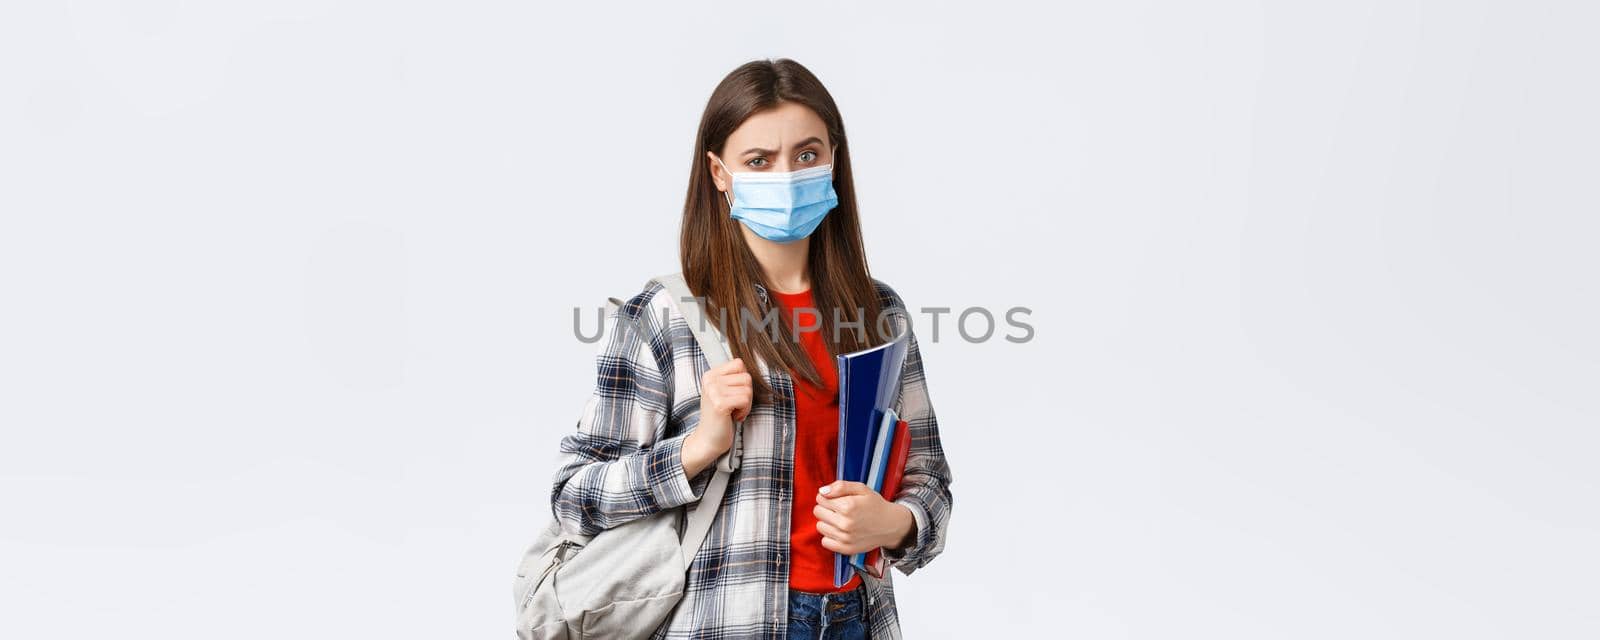 Coronavirus pandemic, covid-19 education, and back to school concept. Doubtful and skeptical female student in medical mask frowning disappointed, hold notebooks and backpack.